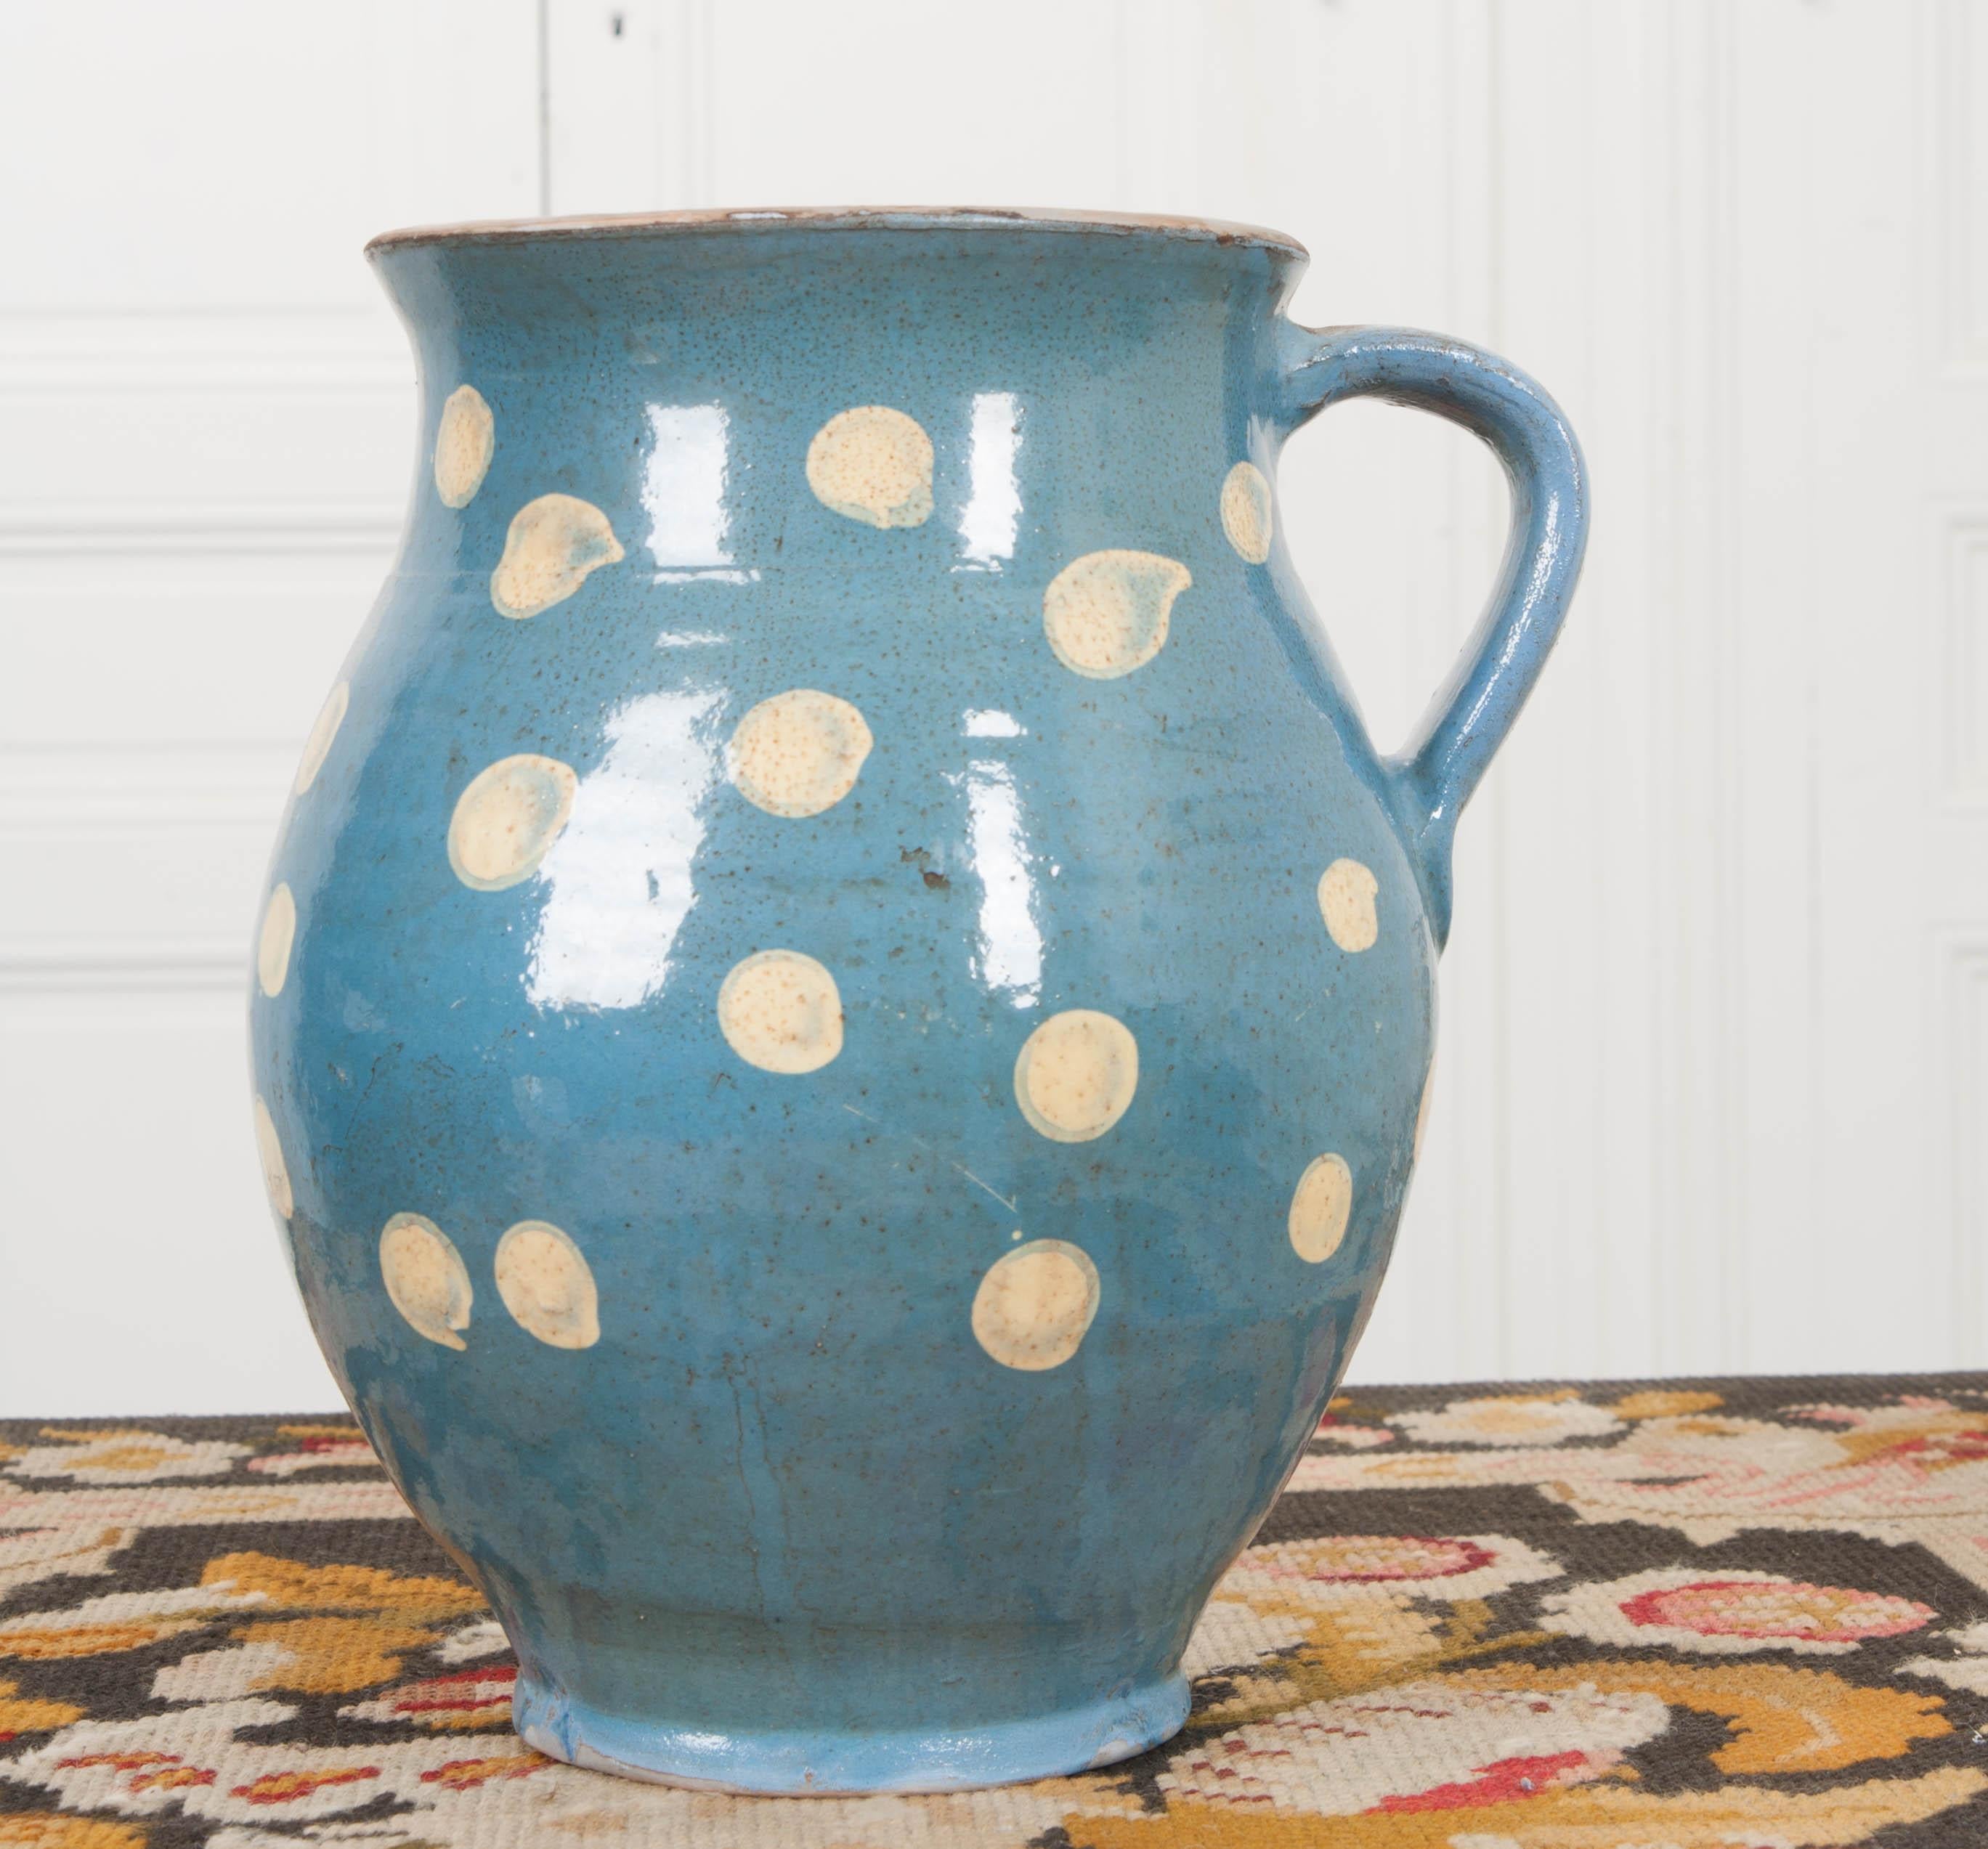 This charming French vintage glazed terra cotta pitcher has been glazed in a fantastic steel-blue, with buttermilk-colored polka-dots providing a fun and colorful design. It was handmade and hand painted, making it a sweet work of art!